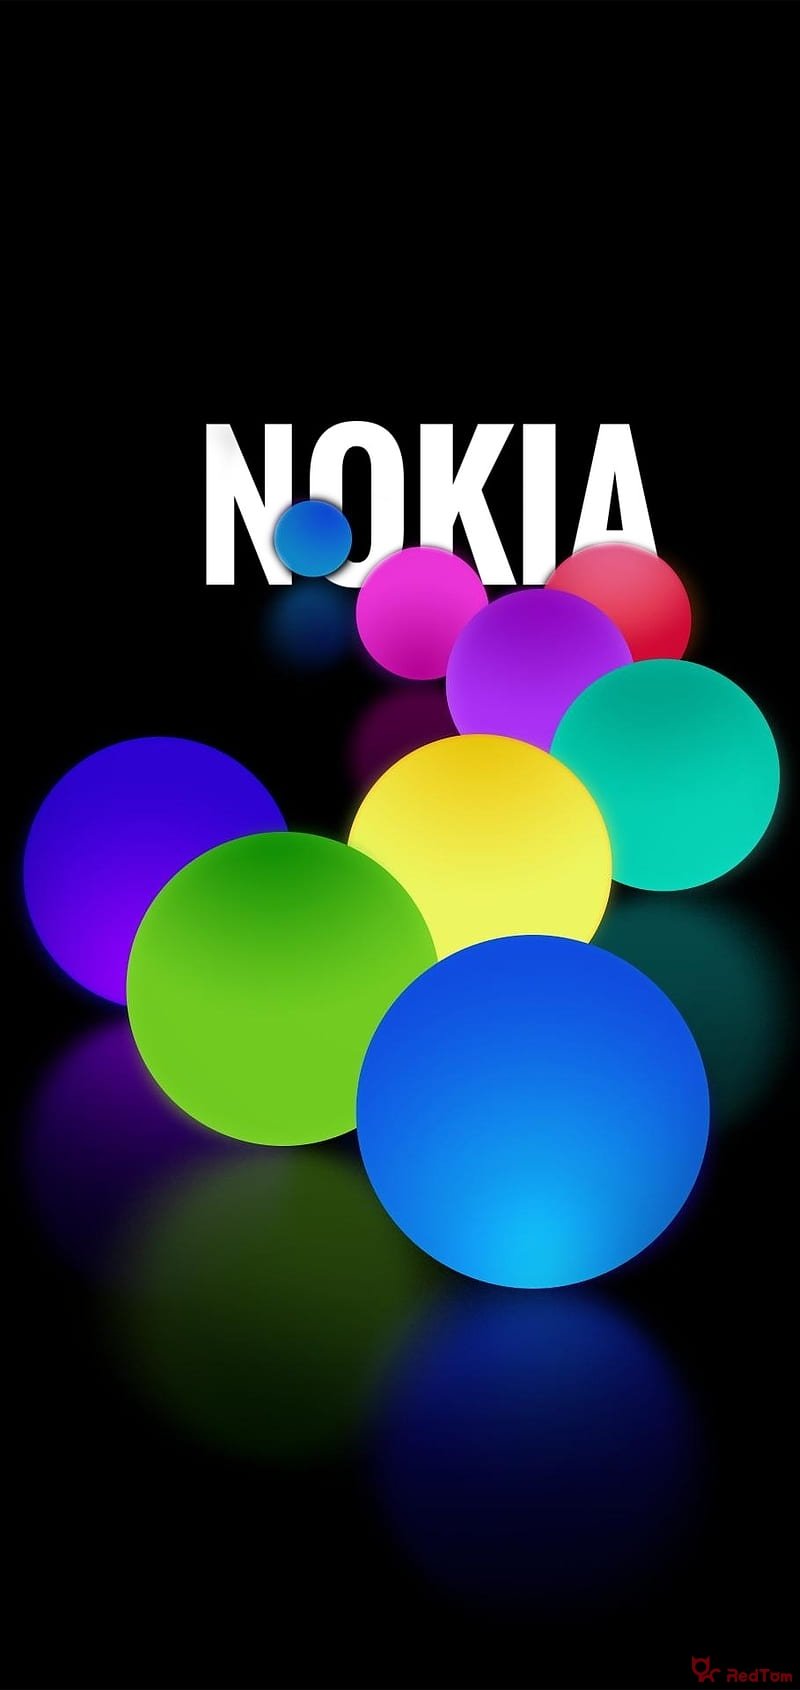 Nokia 5310 XpressMusic themes - free download. Best mobile themes.